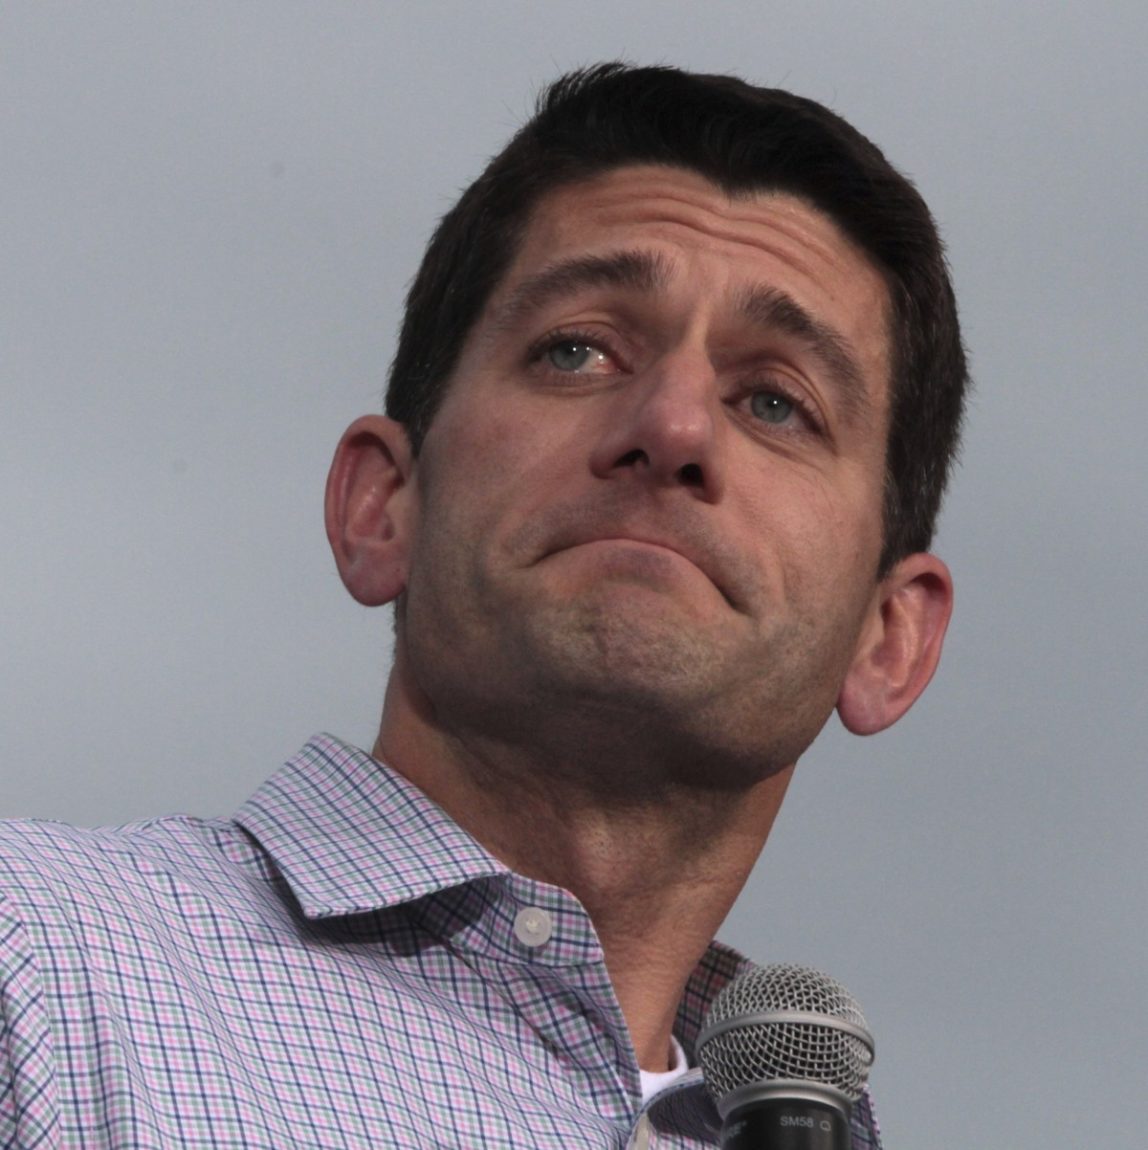 Republican vice presidential candidate Rep. Paul Ryan R-Wis., reacts to audience applause during a campaign event at the Waukesha county expo center, Sunday, Aug. 12, 2012 in Waukesha, Wis. (AP Photo/Mary Altaffer)